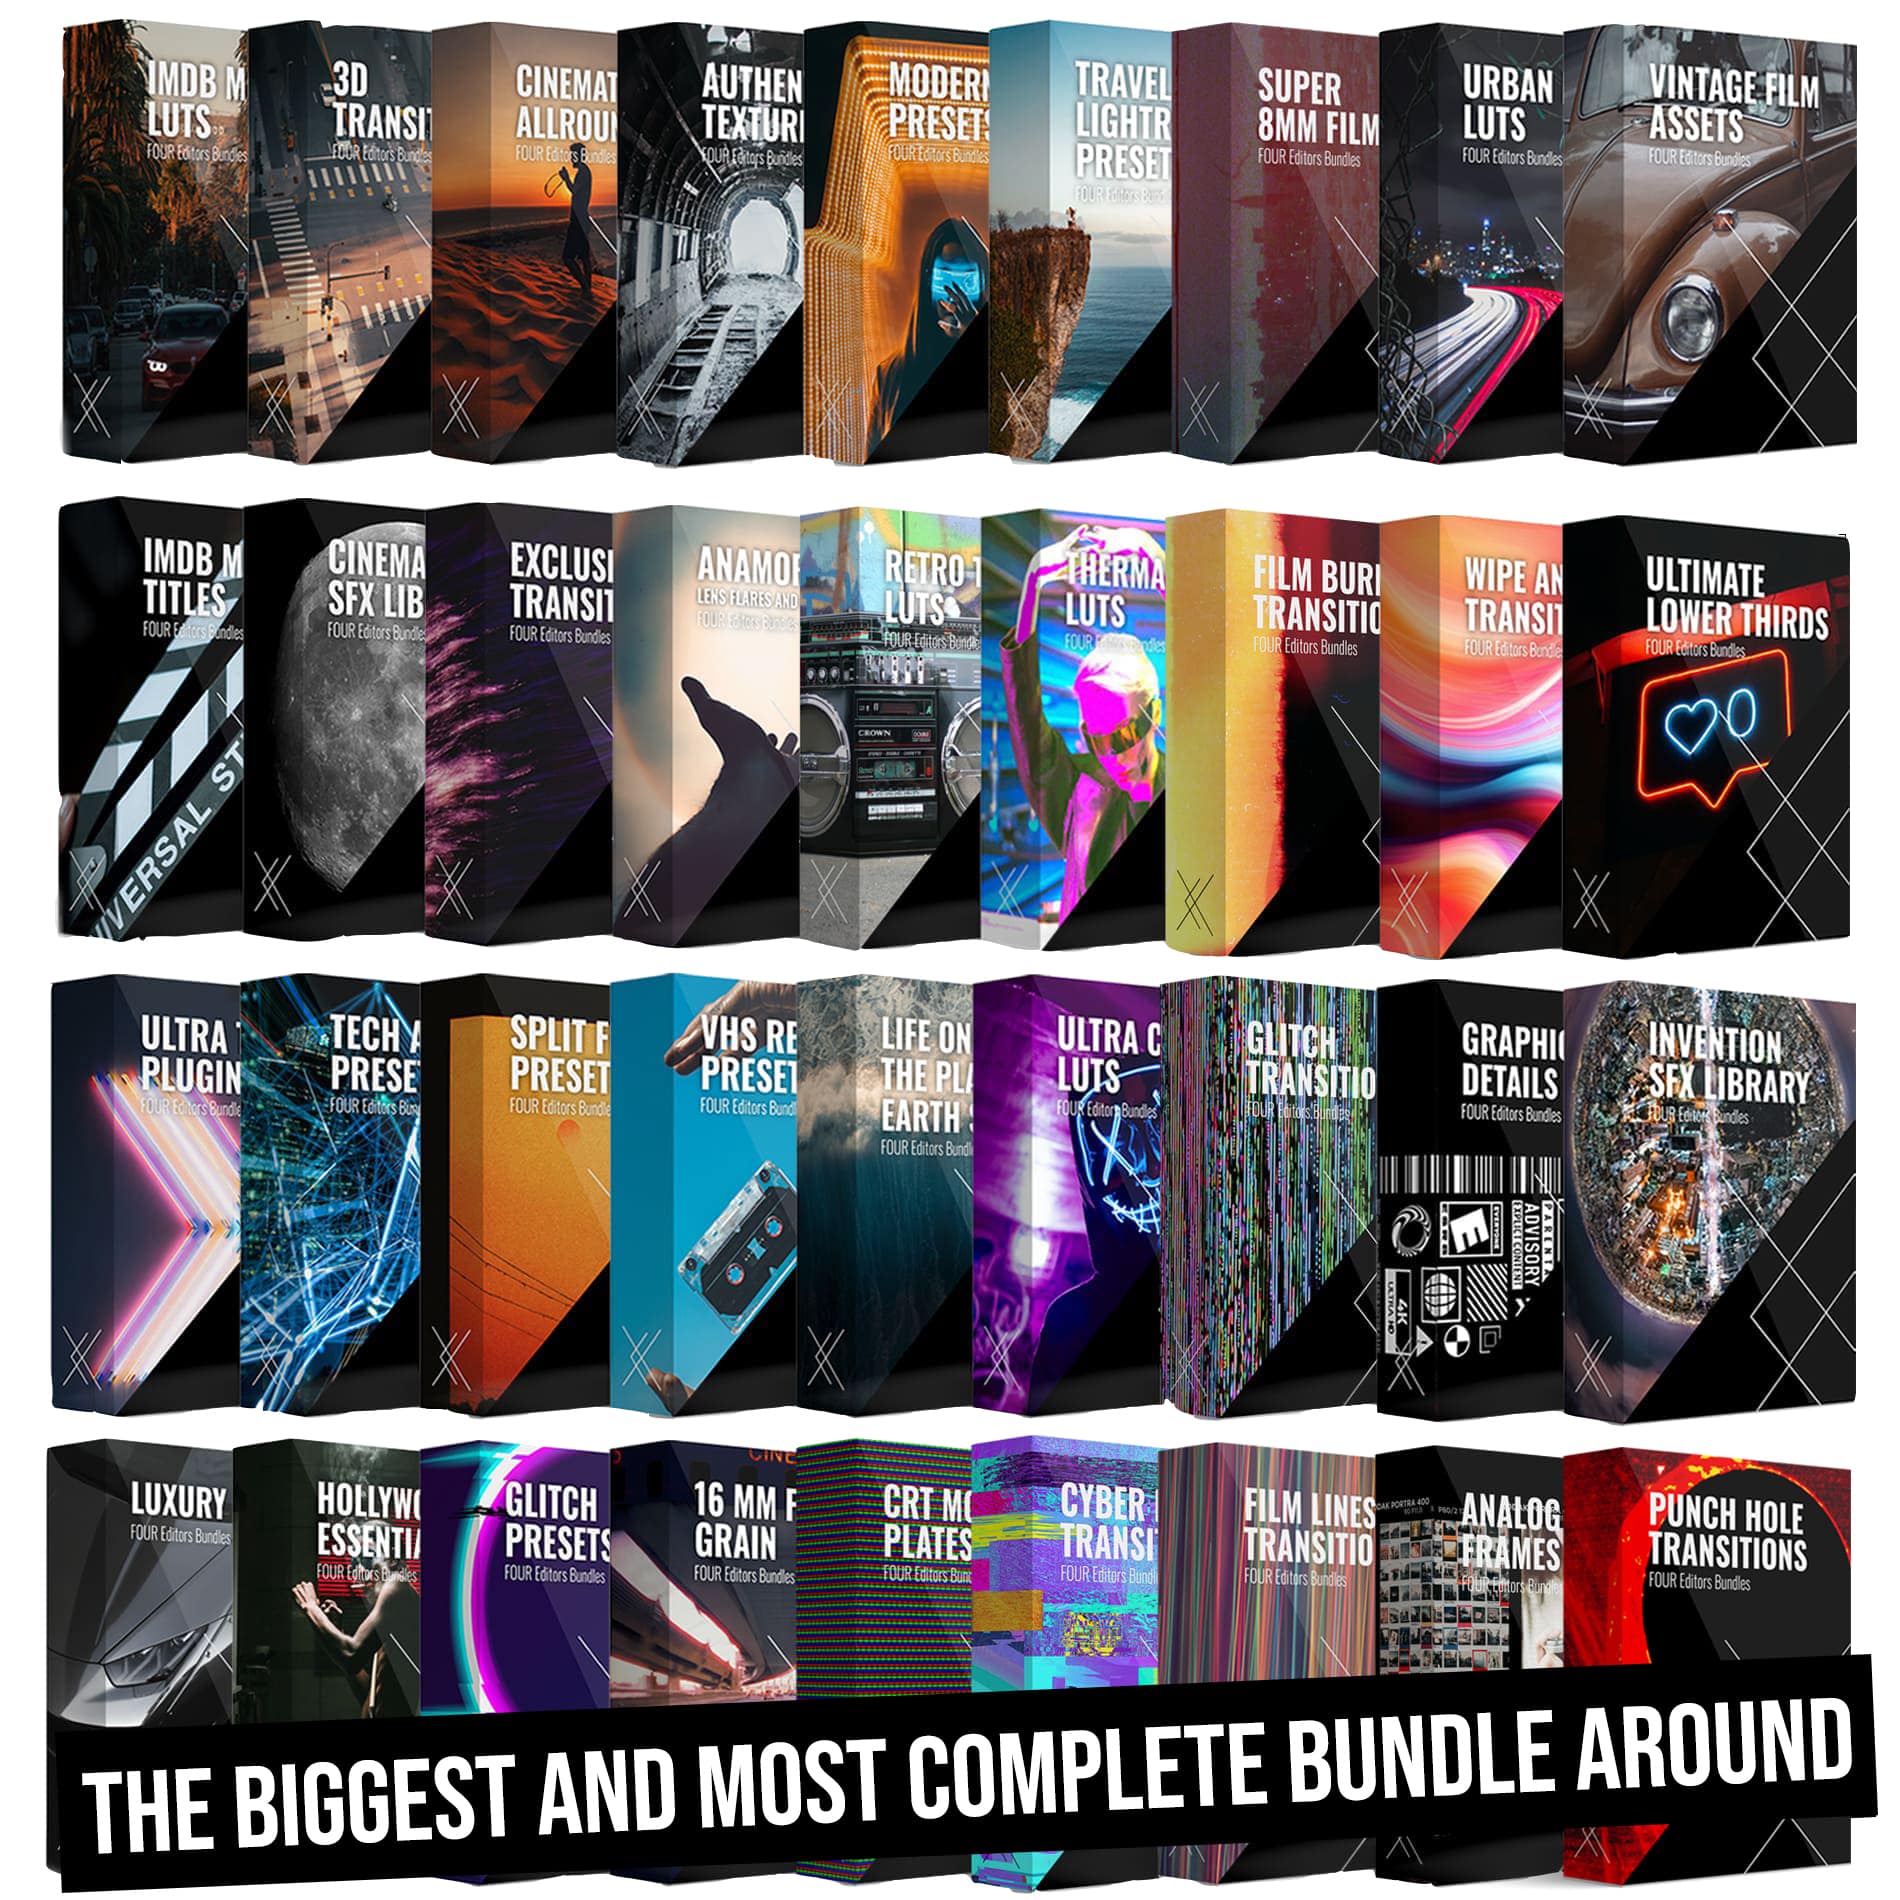 Platinum Bundle: OUR ENTIRE COLLECTION (ALL-IN-ONE) - 10,000+